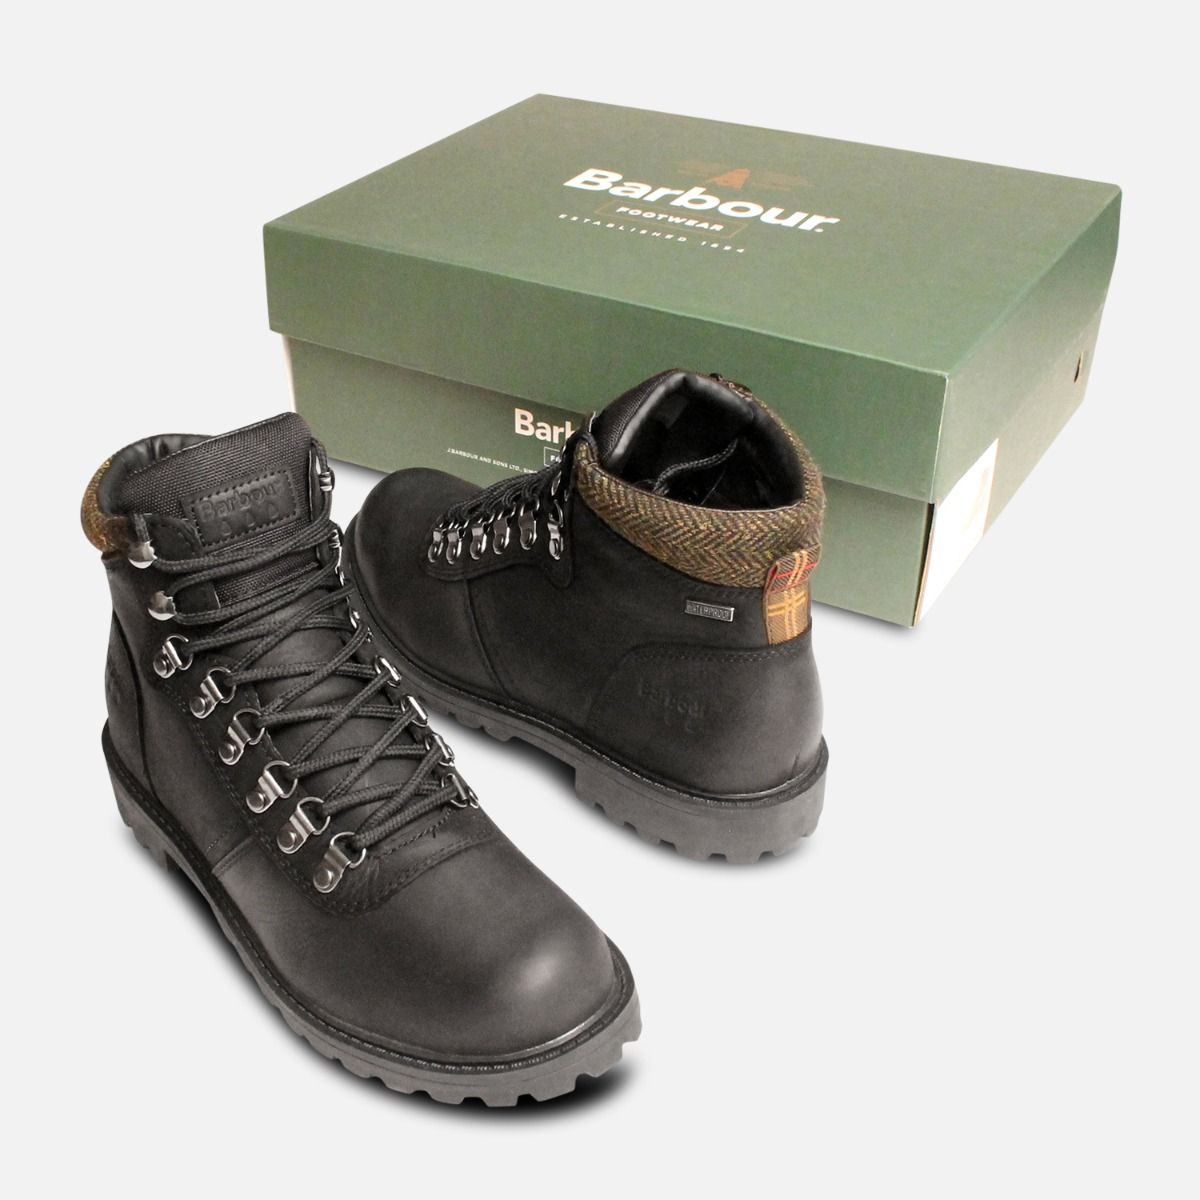 barbour walking shoes